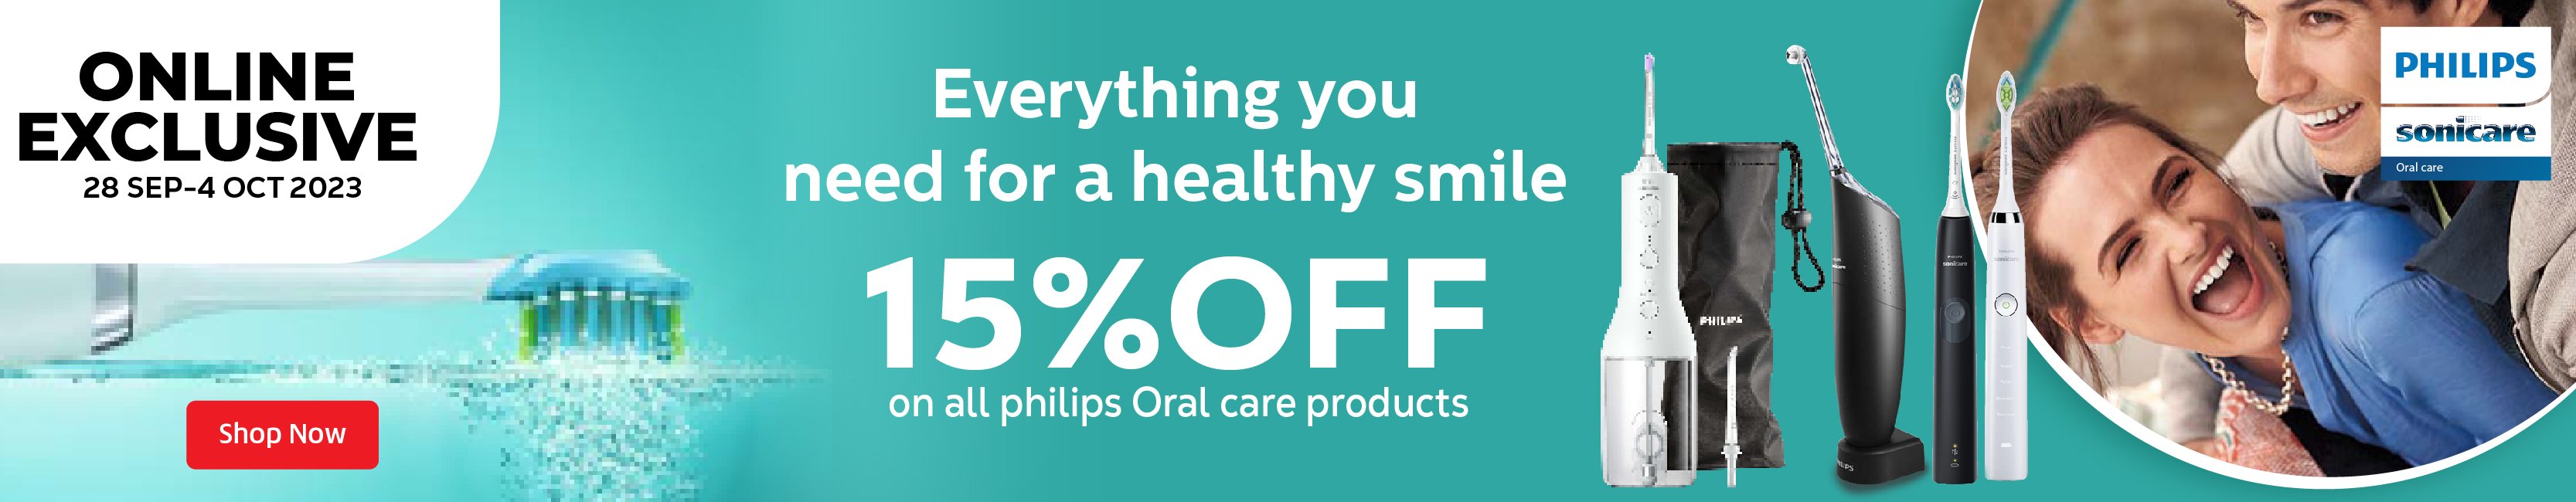 Philips Oral Care-01.jpg